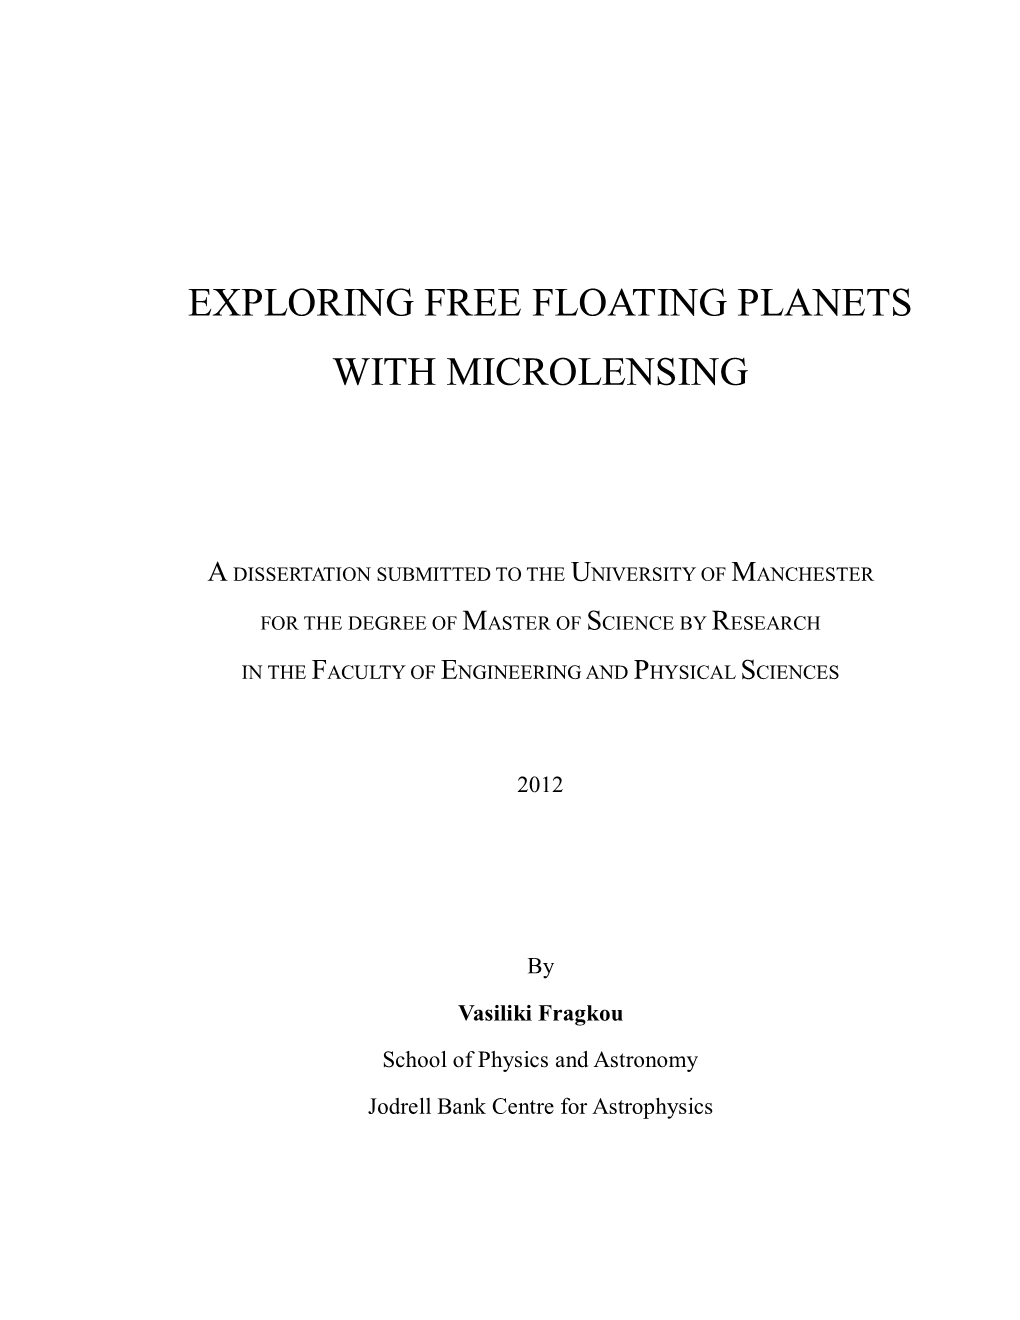 Exploring Free Floating Planets with Microlensing